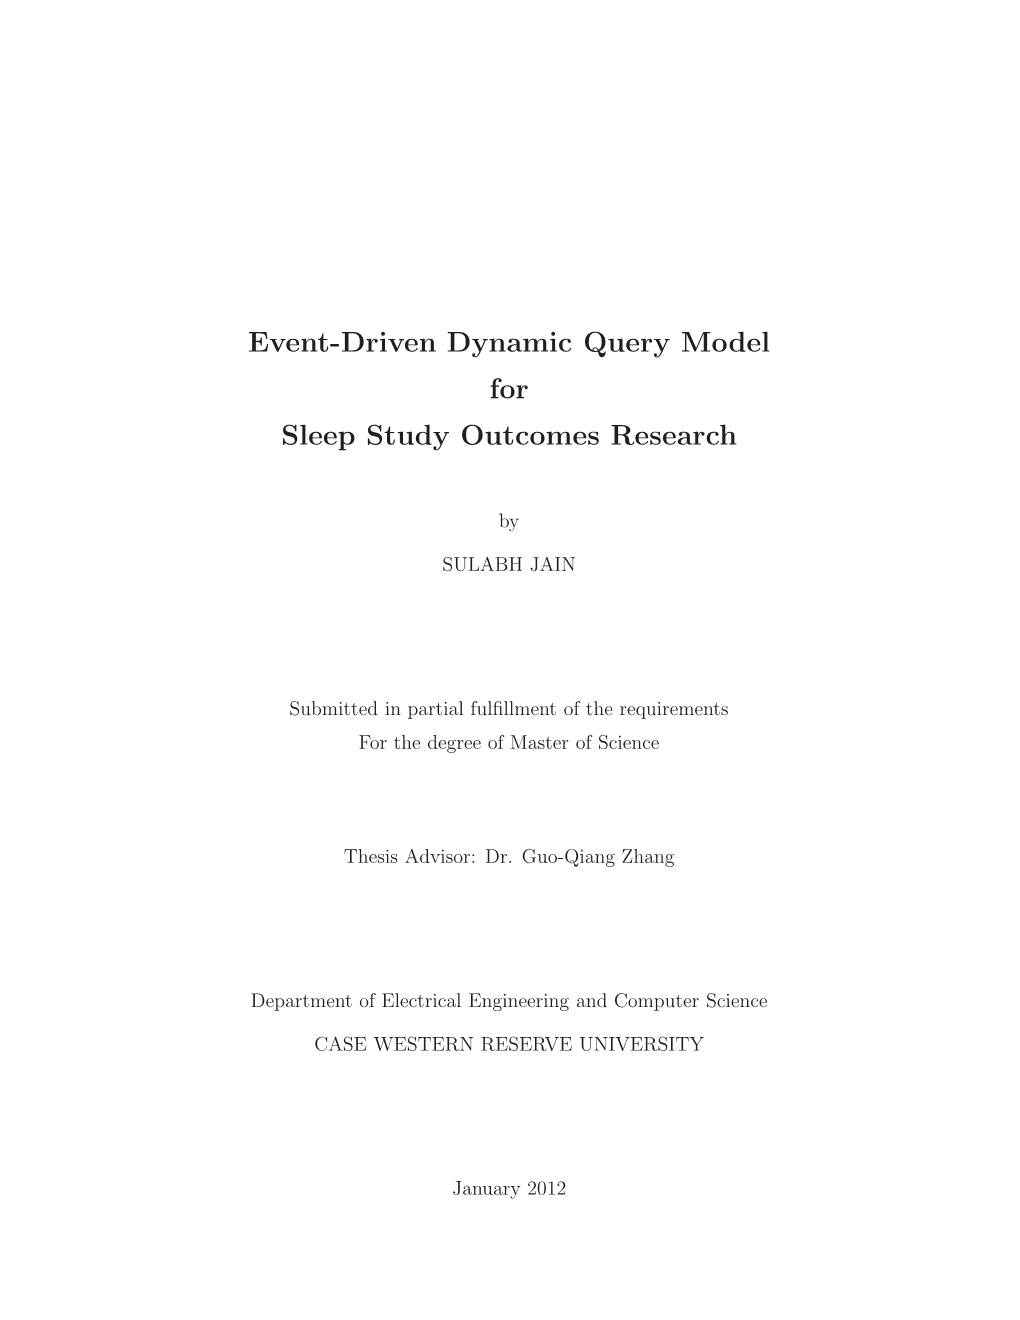 Event-Driven Dynamic Query Model for Sleep Study Outcomes Research